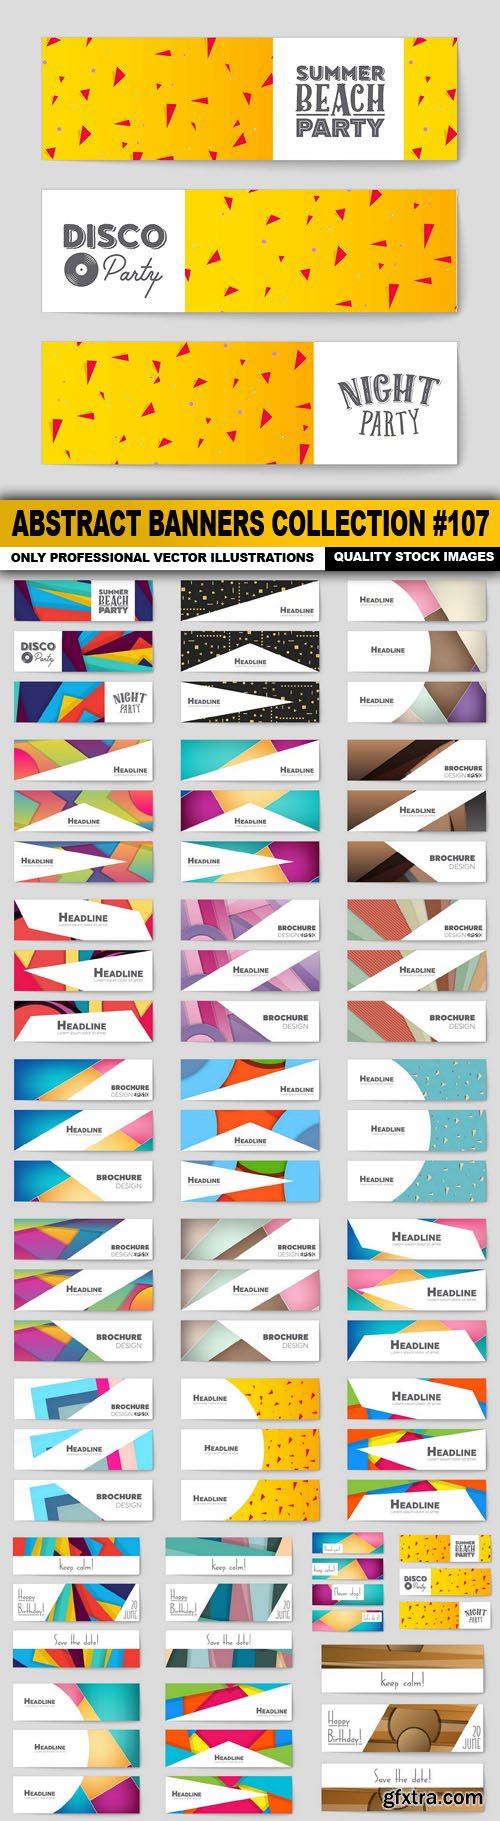 Abstract Banners Collection #107 - 25 Vectors